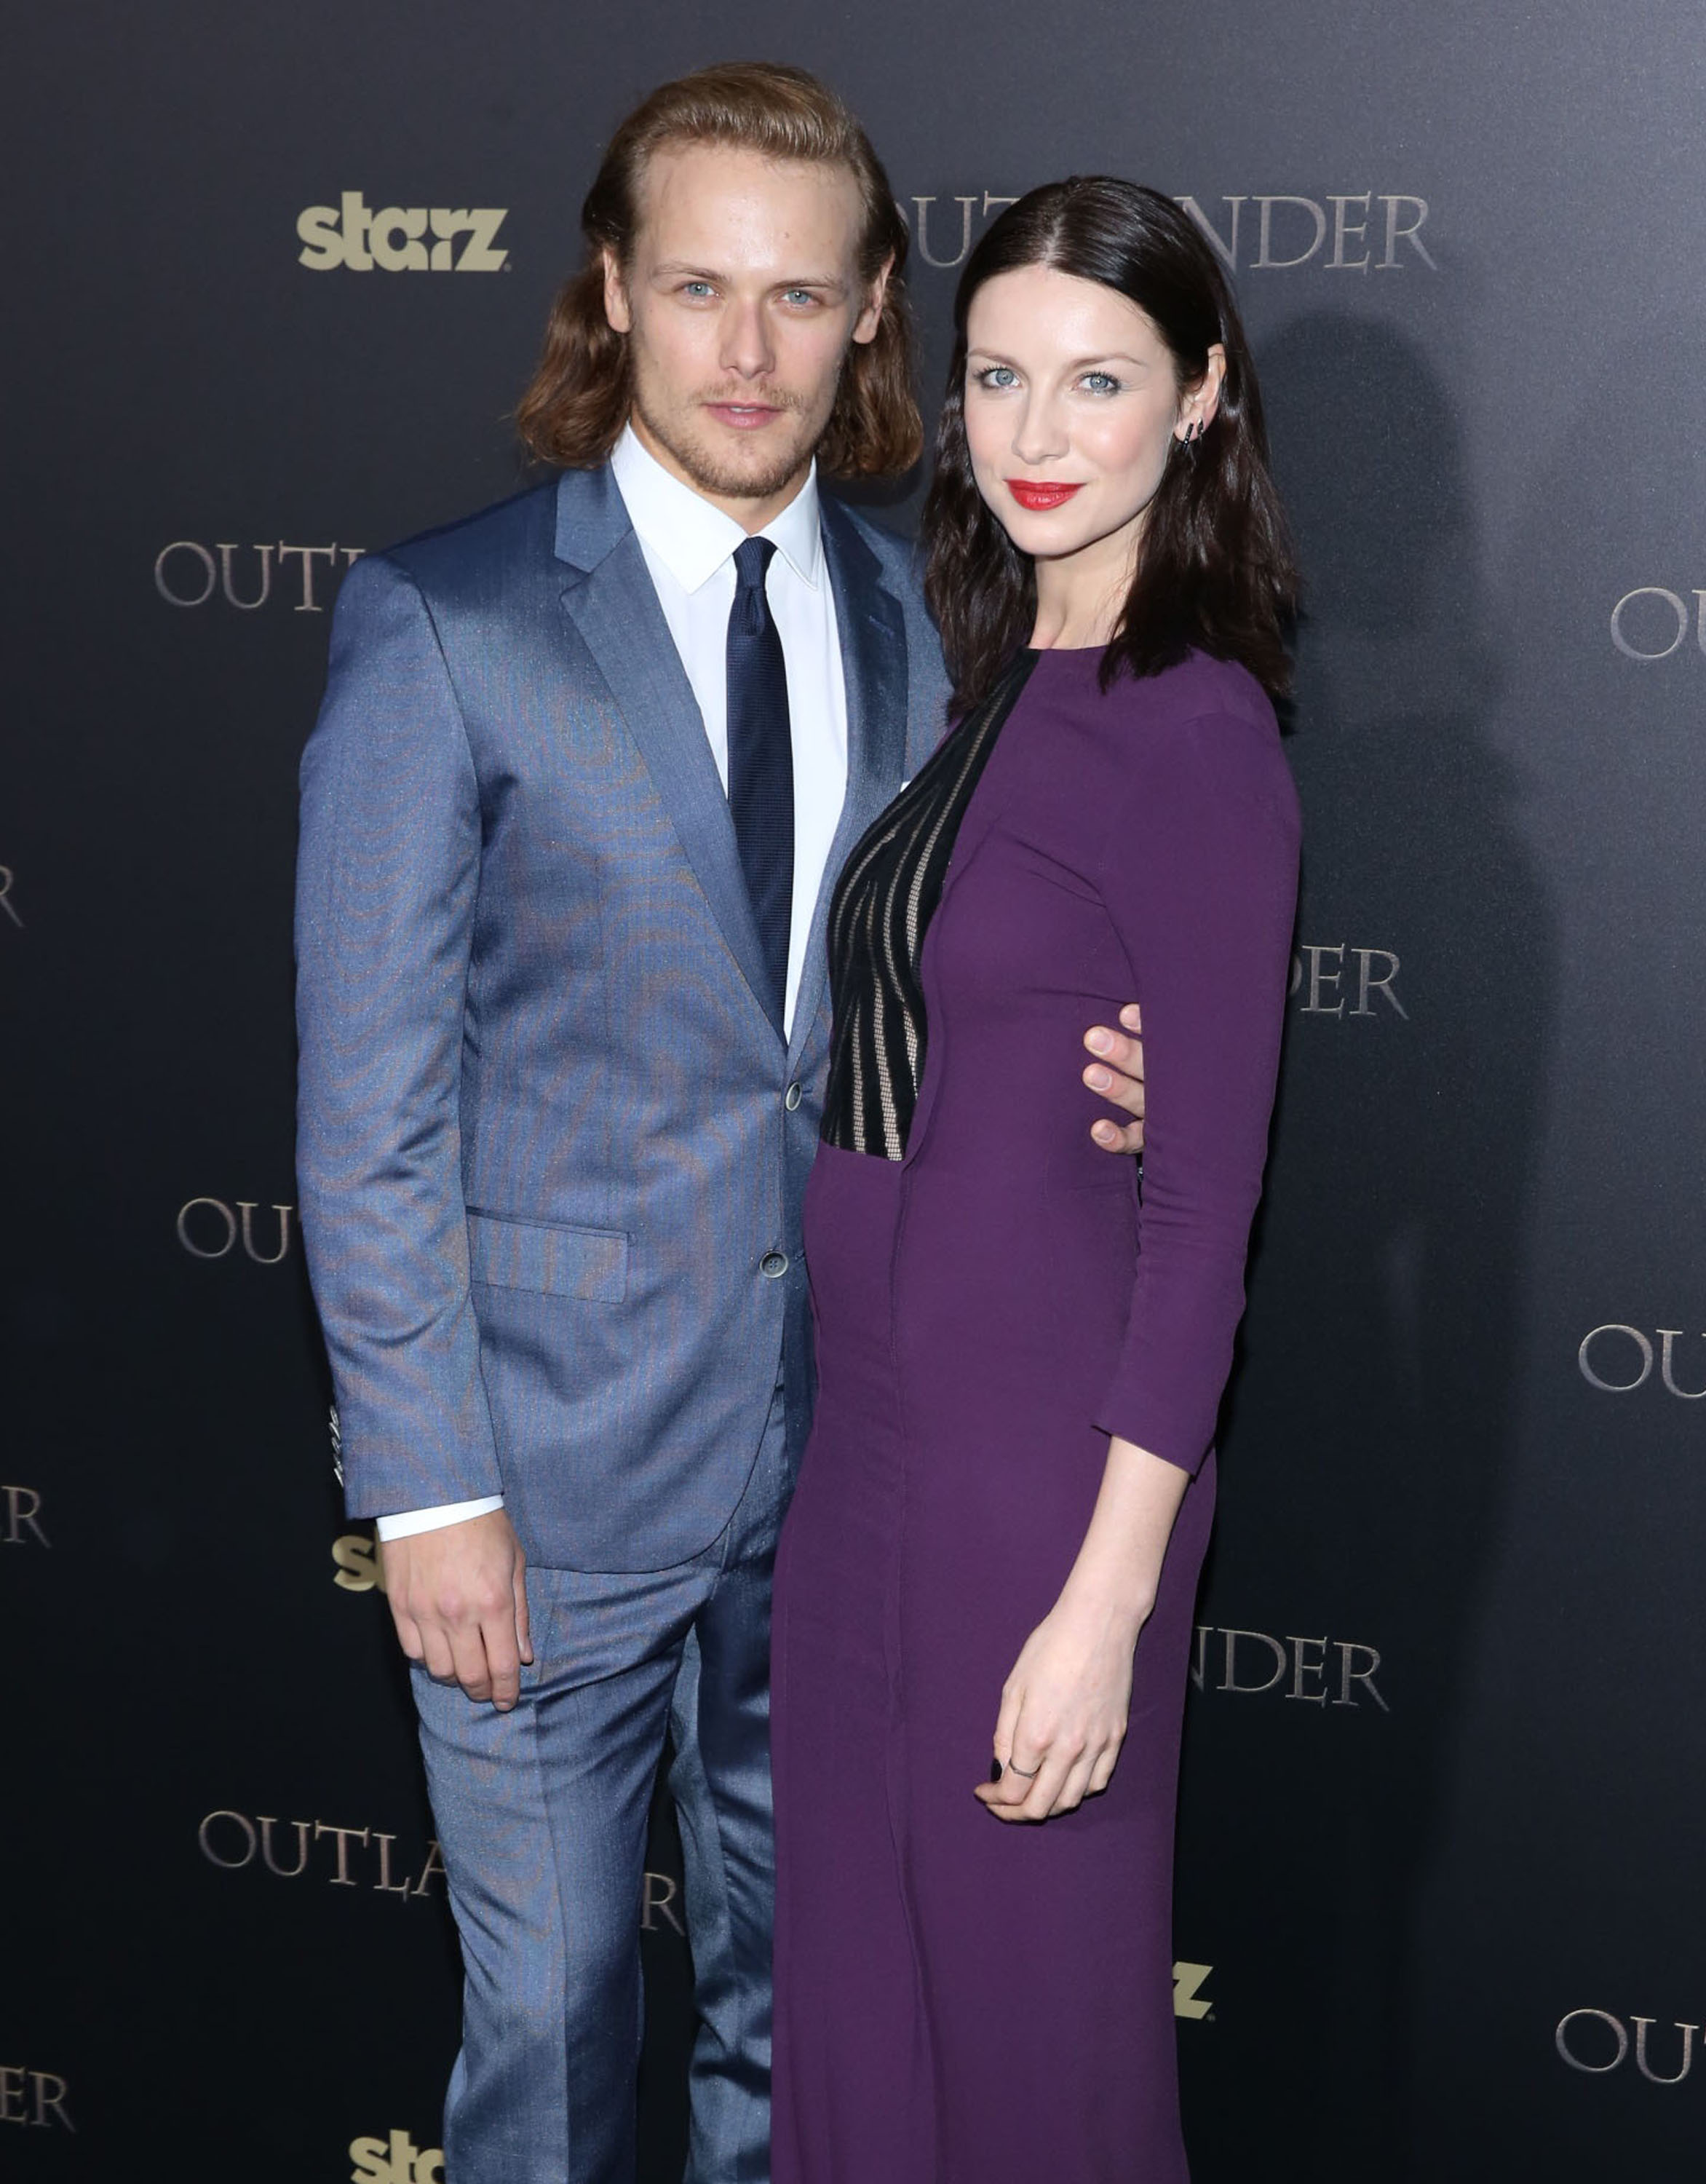 Well Played, The Outlander Premiere